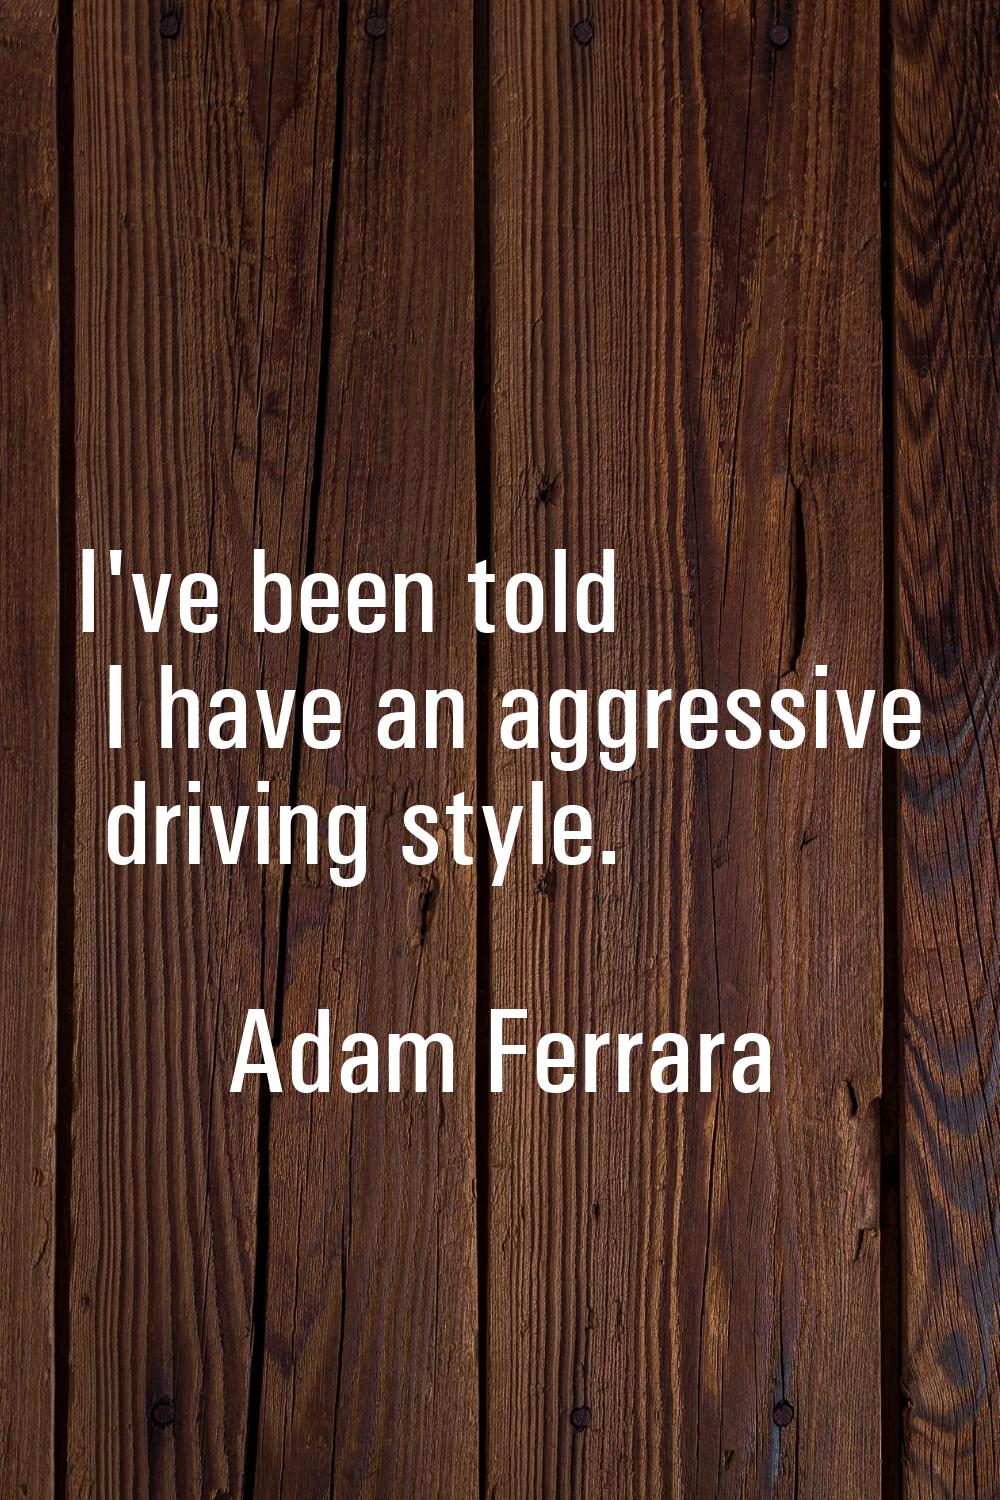 I've been told I have an aggressive driving style.